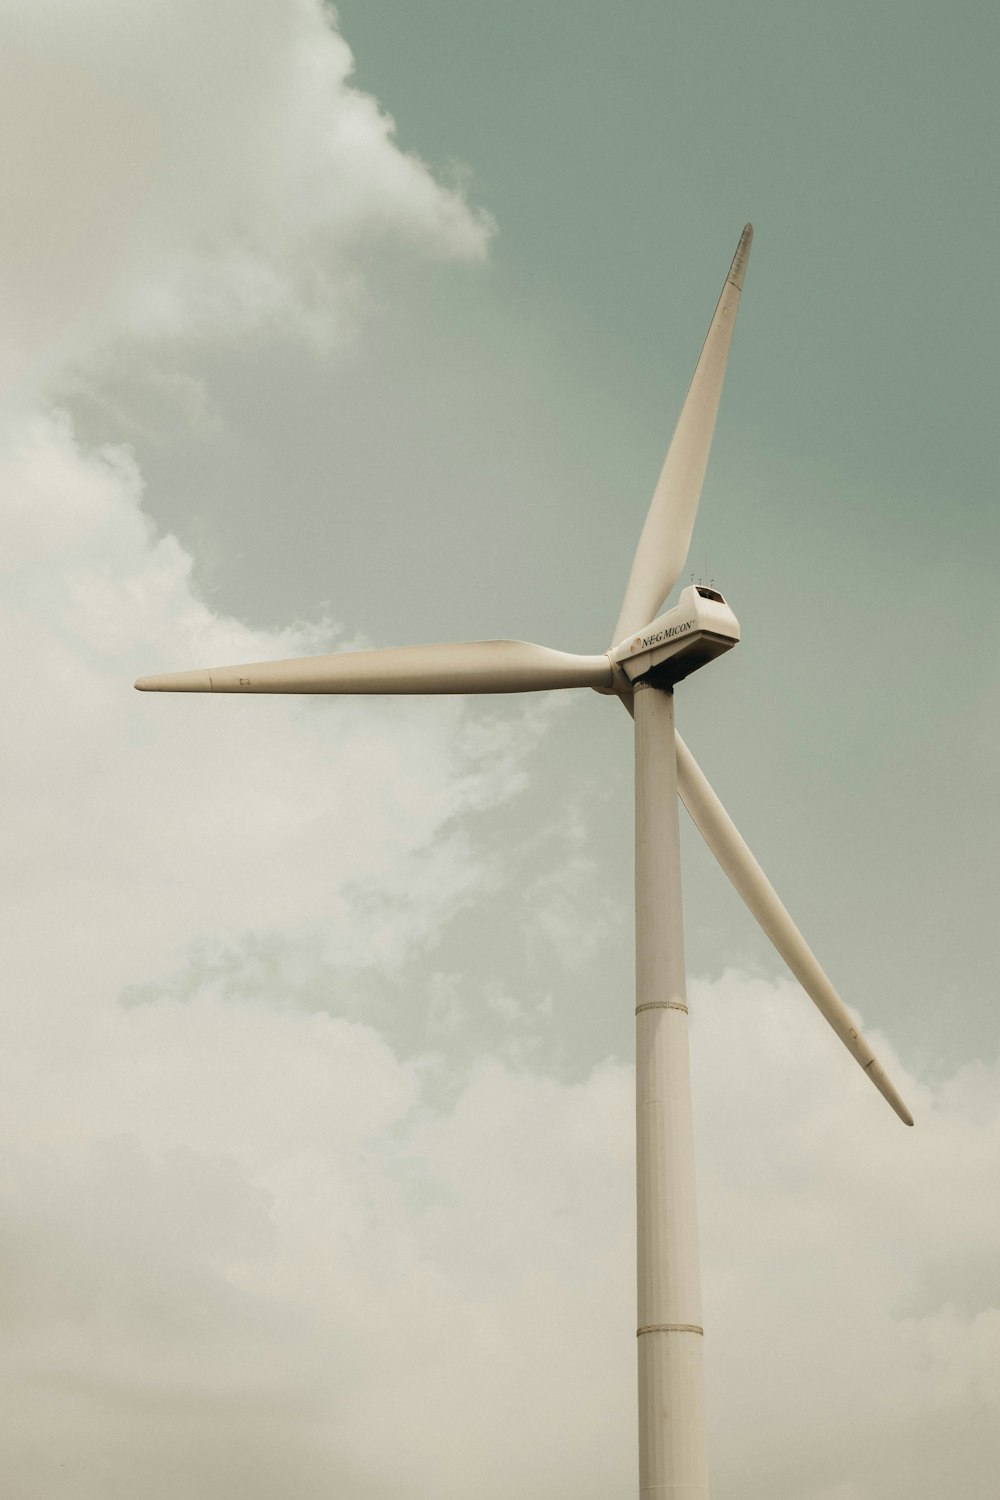 a wind turbine is shown against a cloudy sky